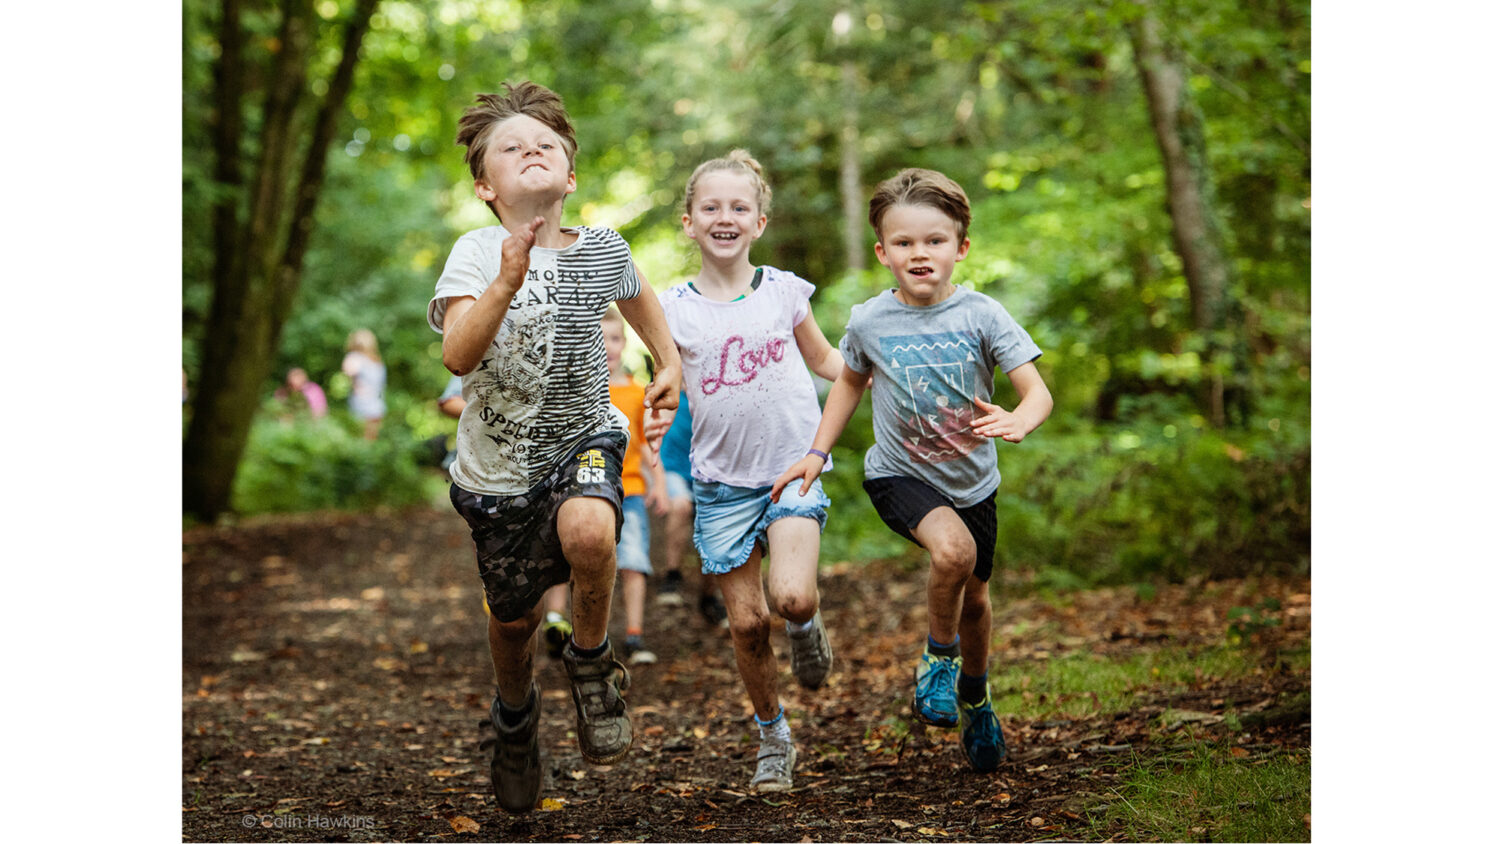 Lifestyle photography of children running for Tamar Trails by Colin Hawkins